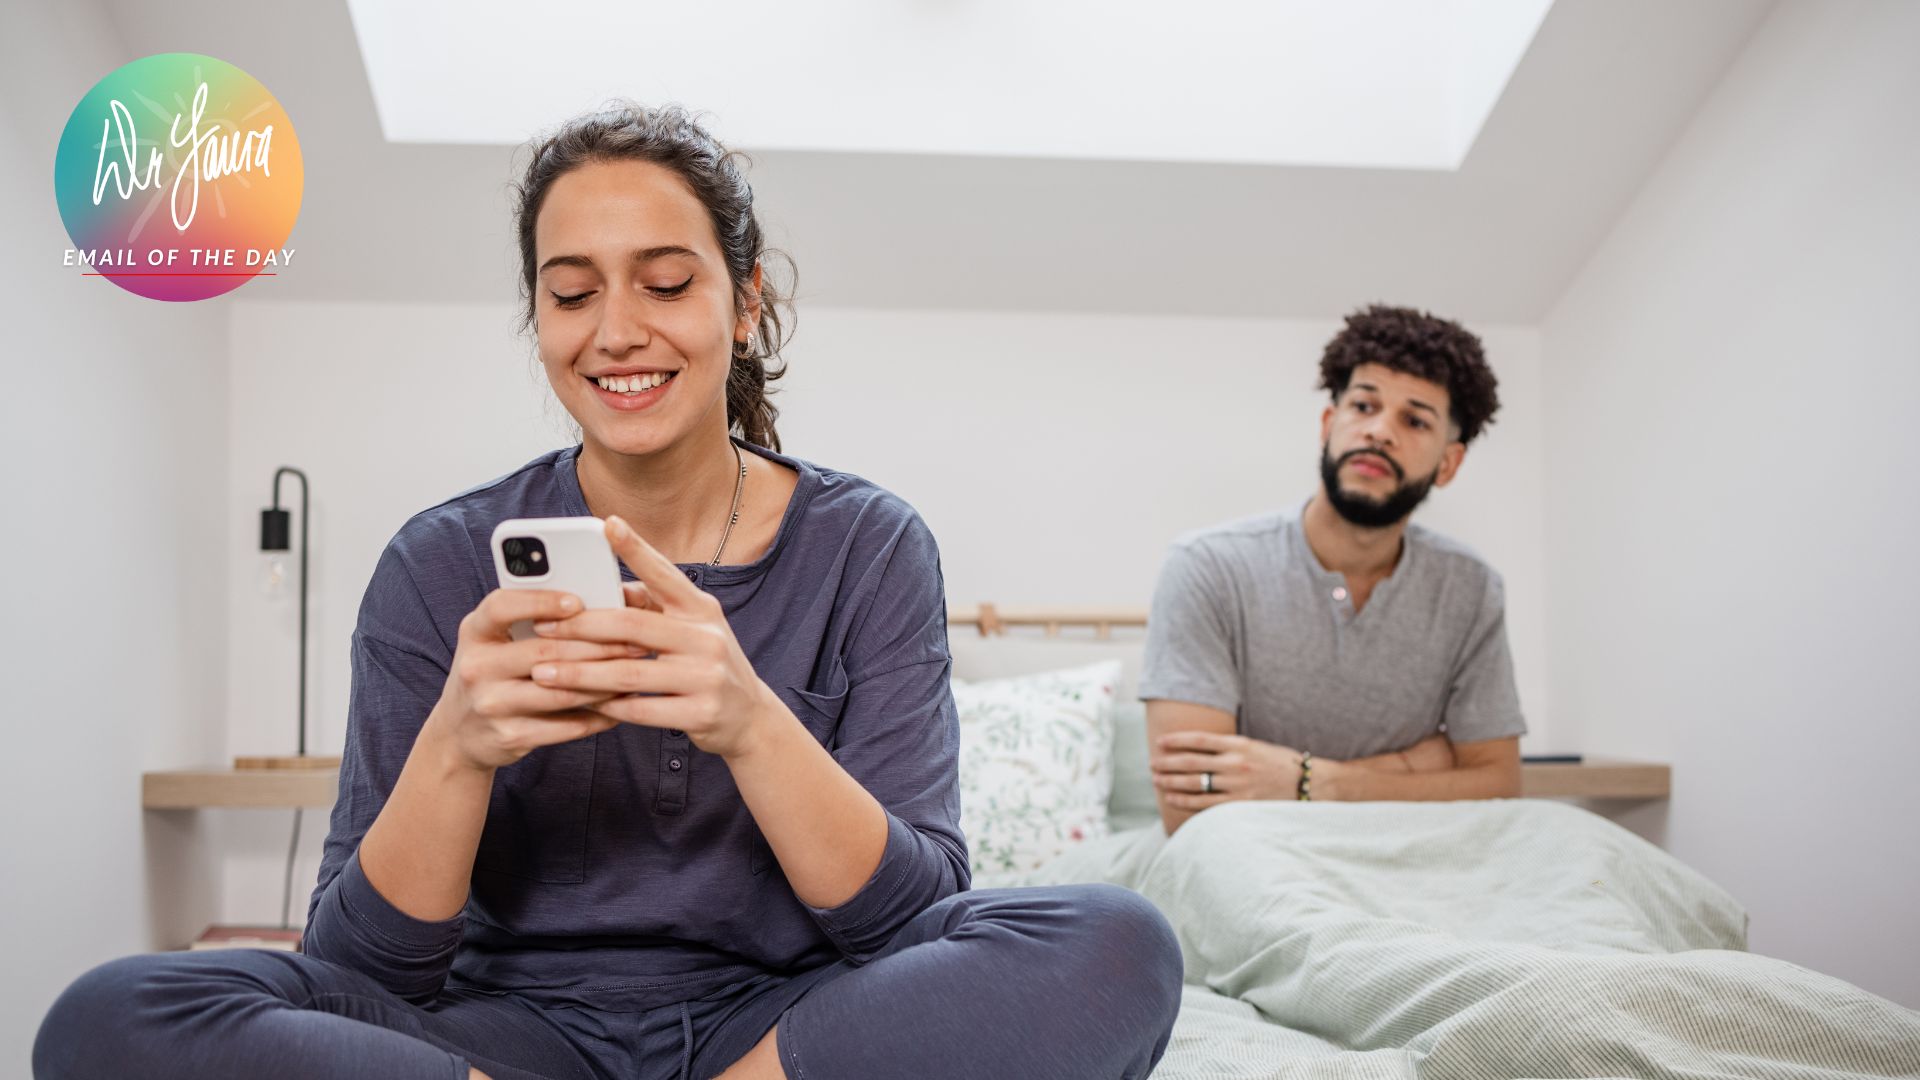 Woman smiles while looking at phone with man sitting behind her on the bed with his arms crossed and looking at her